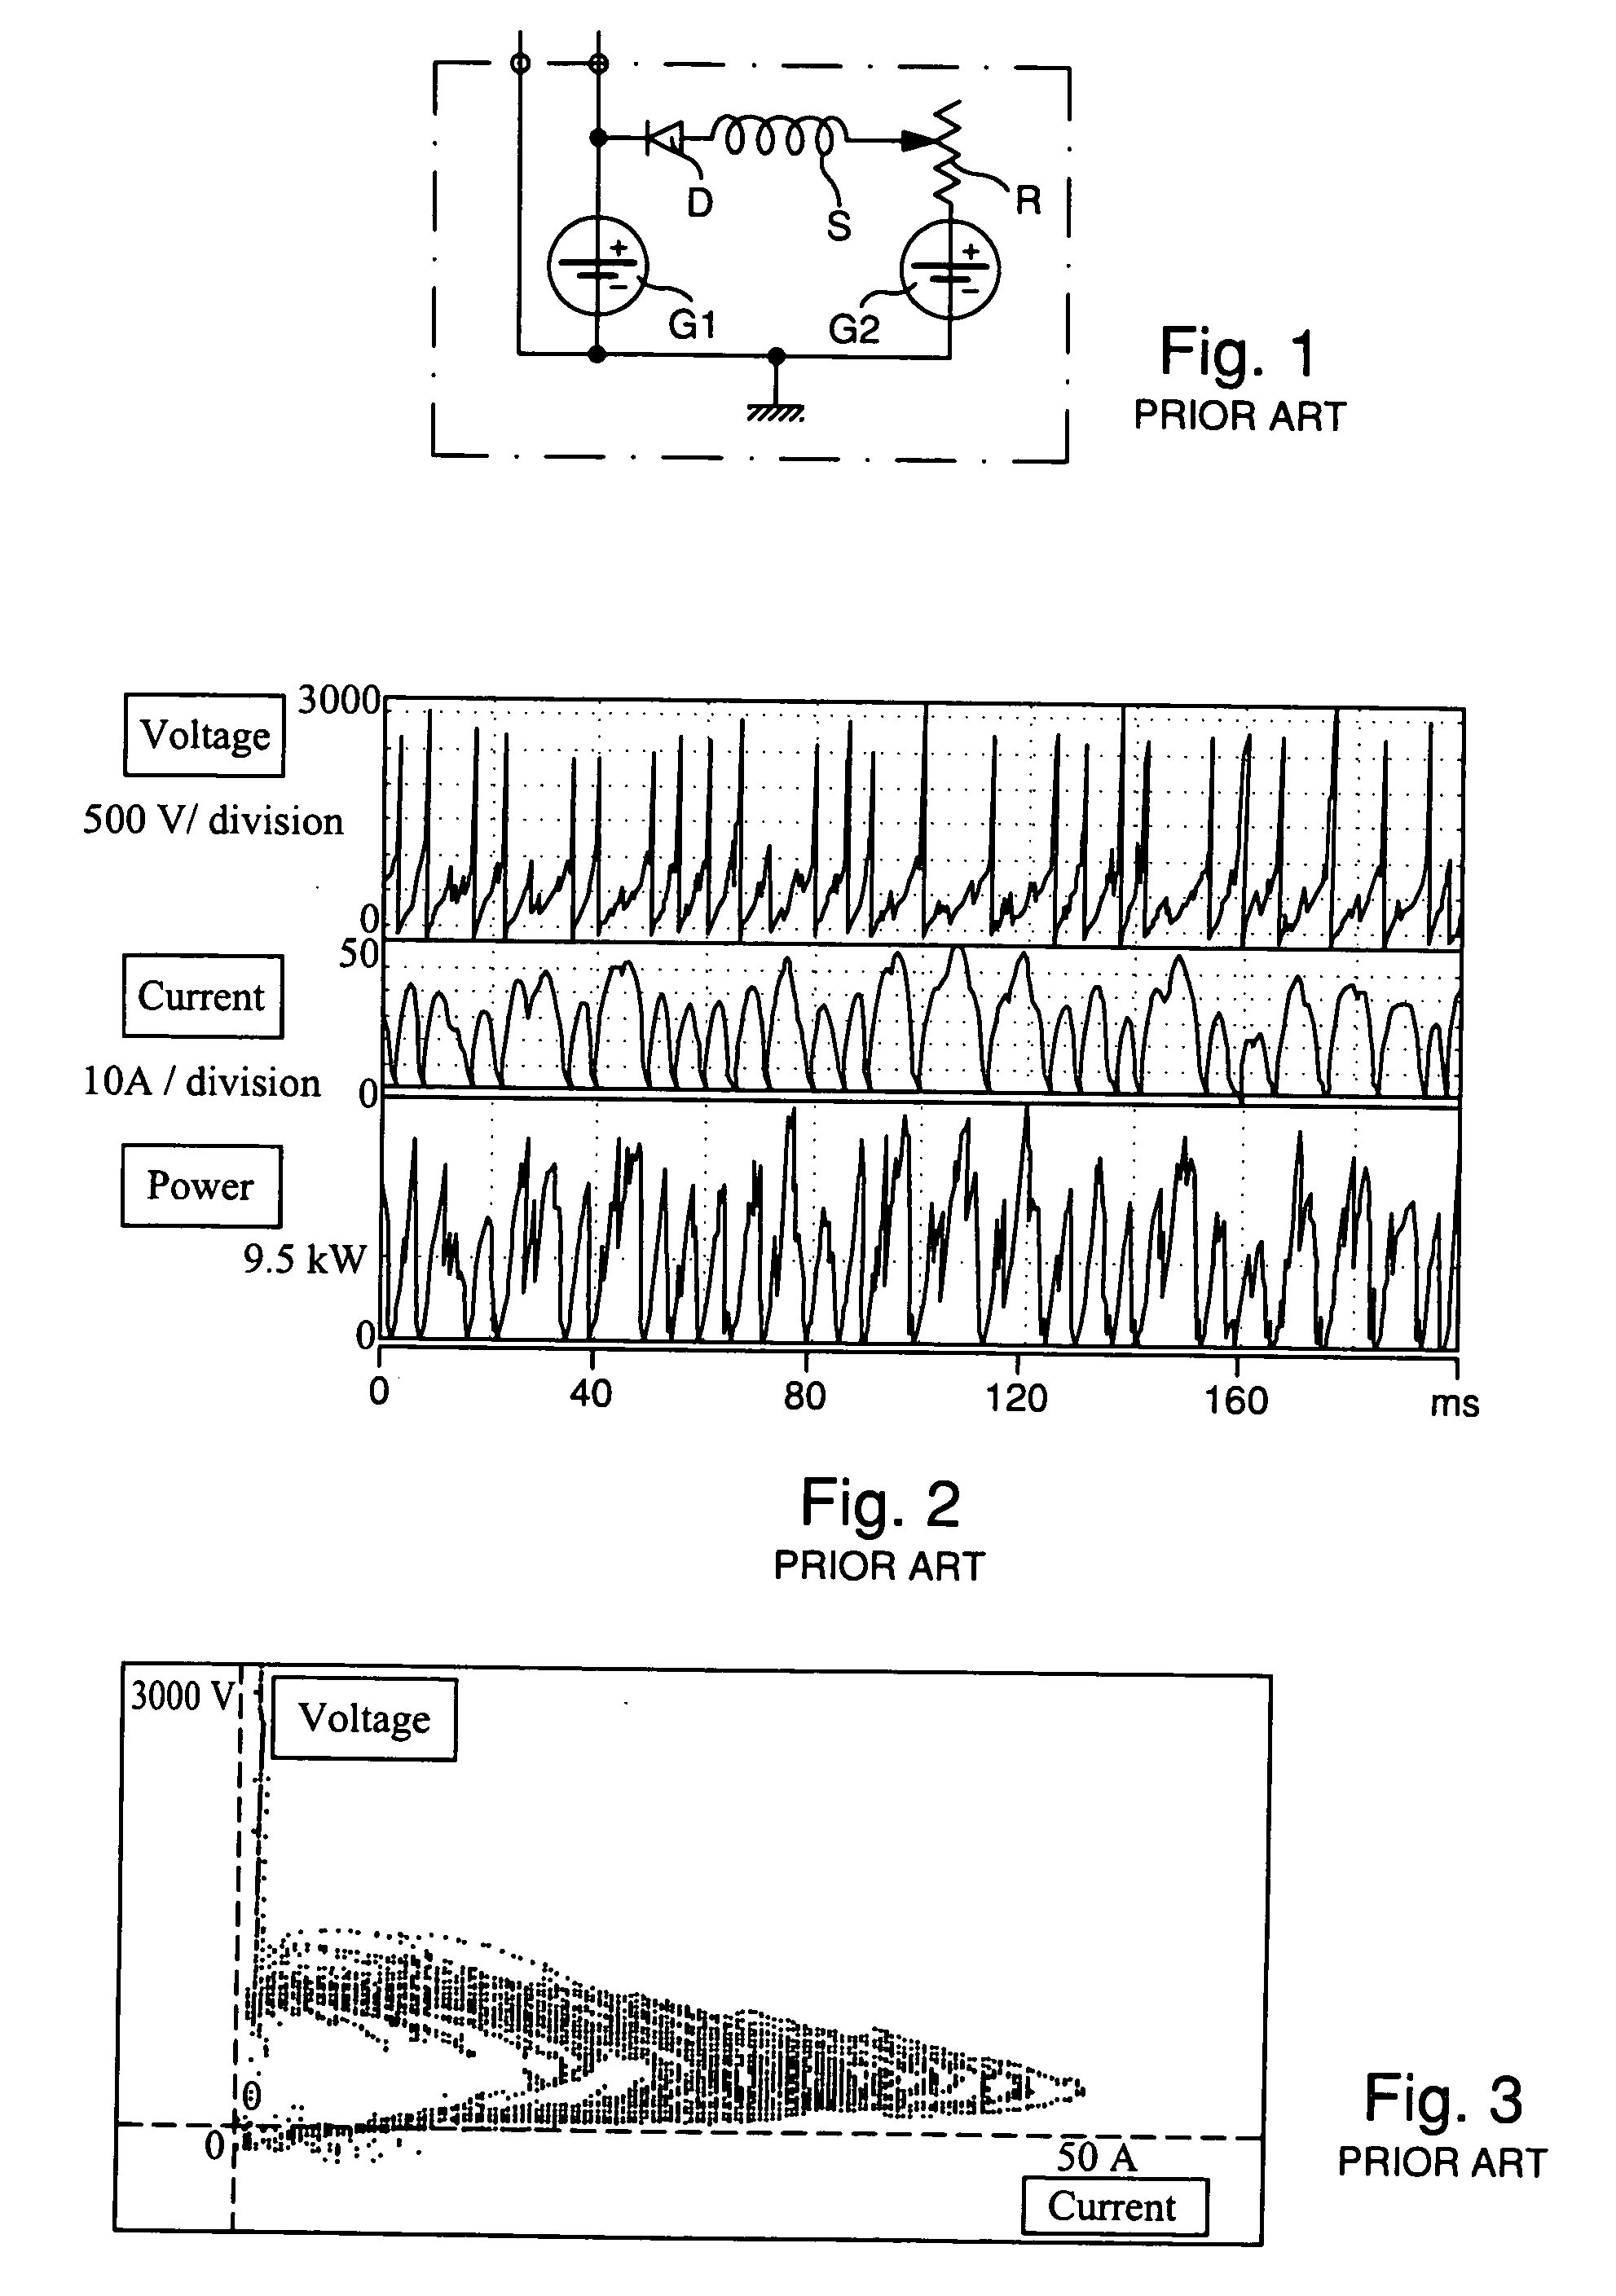 Systems and method for ignition and reignition of unstable electrical discharges